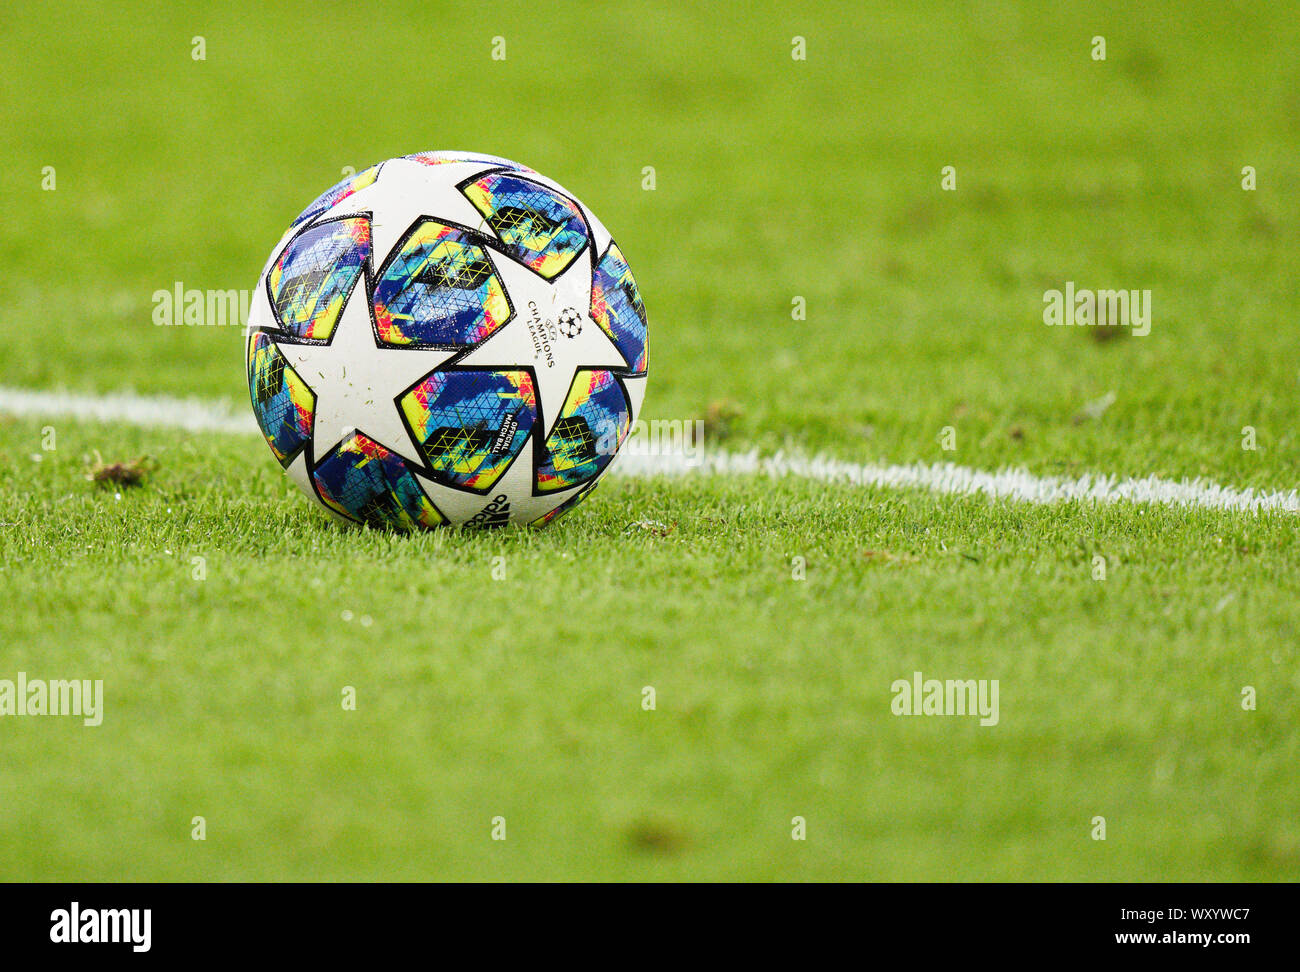 Adidas Finale 18 High Resolution Stock Photography and Images - Alamy